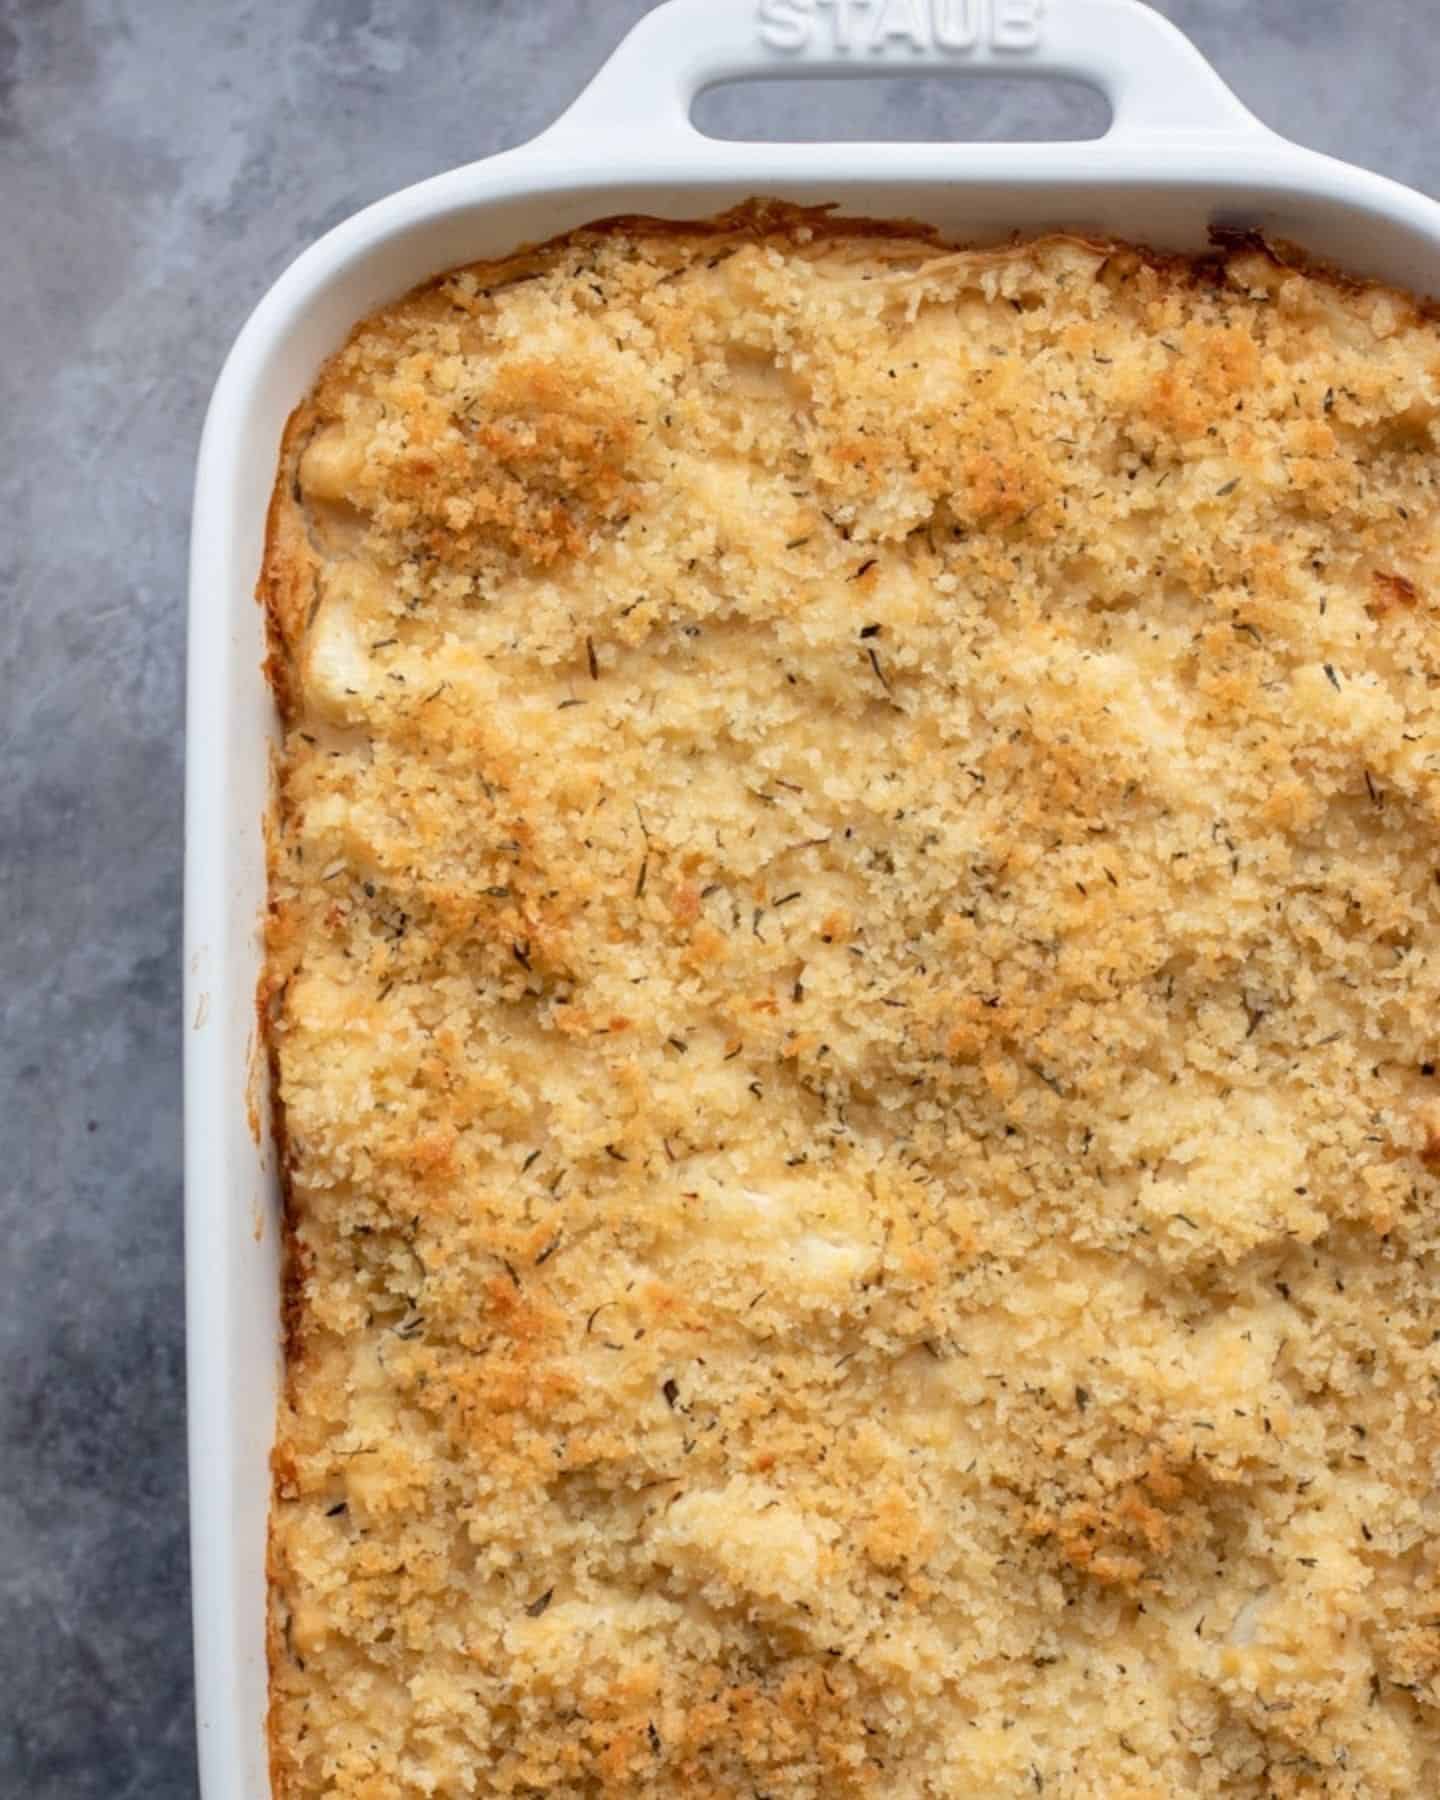 Vegan cauliflower gratin with crumbs topping in a white baking dish